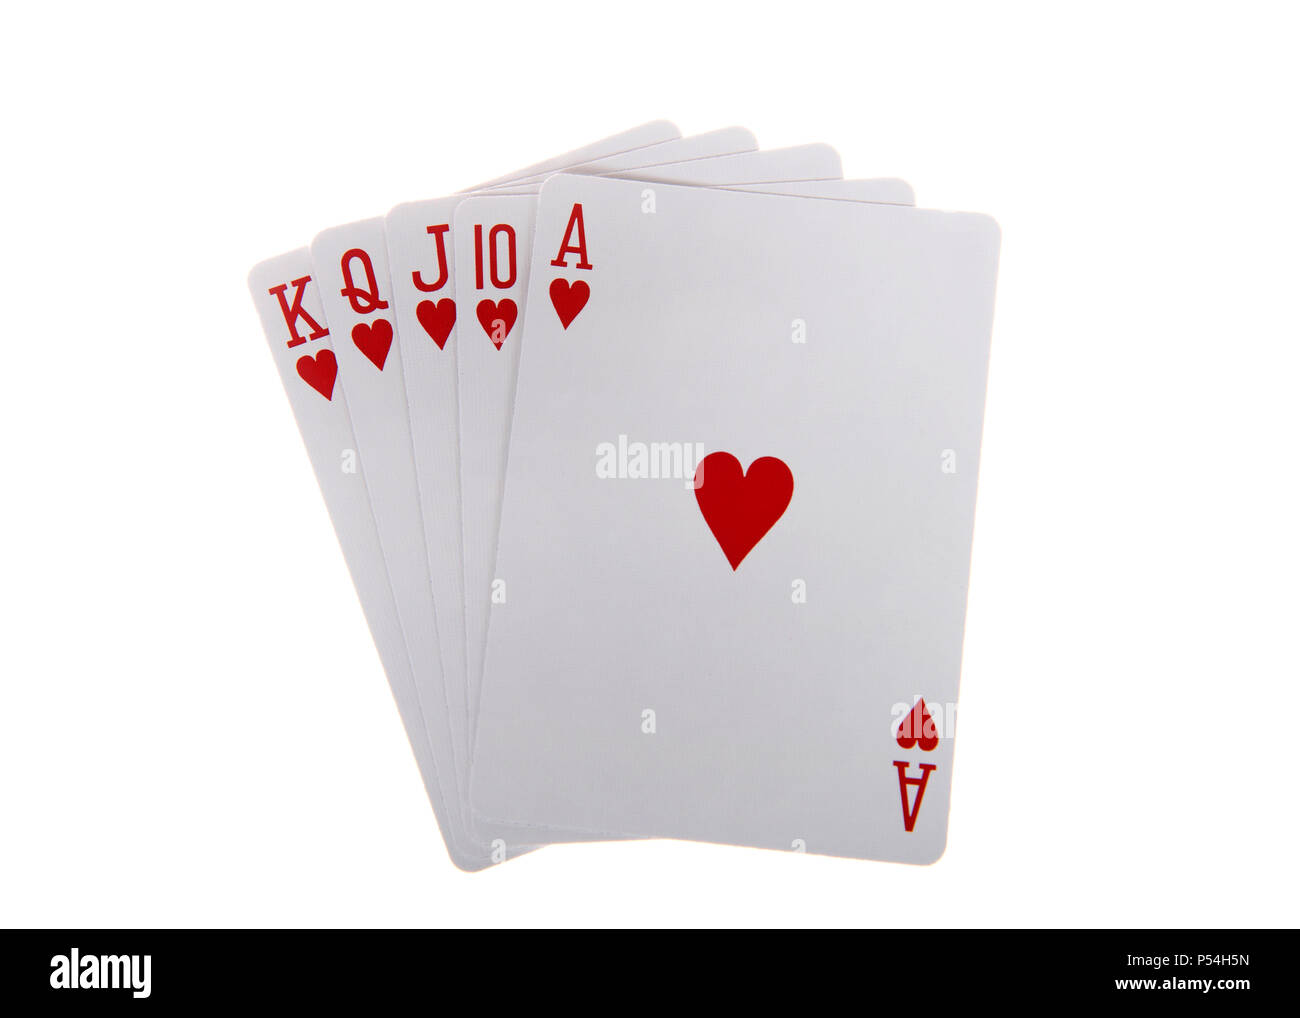 Playing cards, royal flush. A royal flush is a straight flush that has a  high card